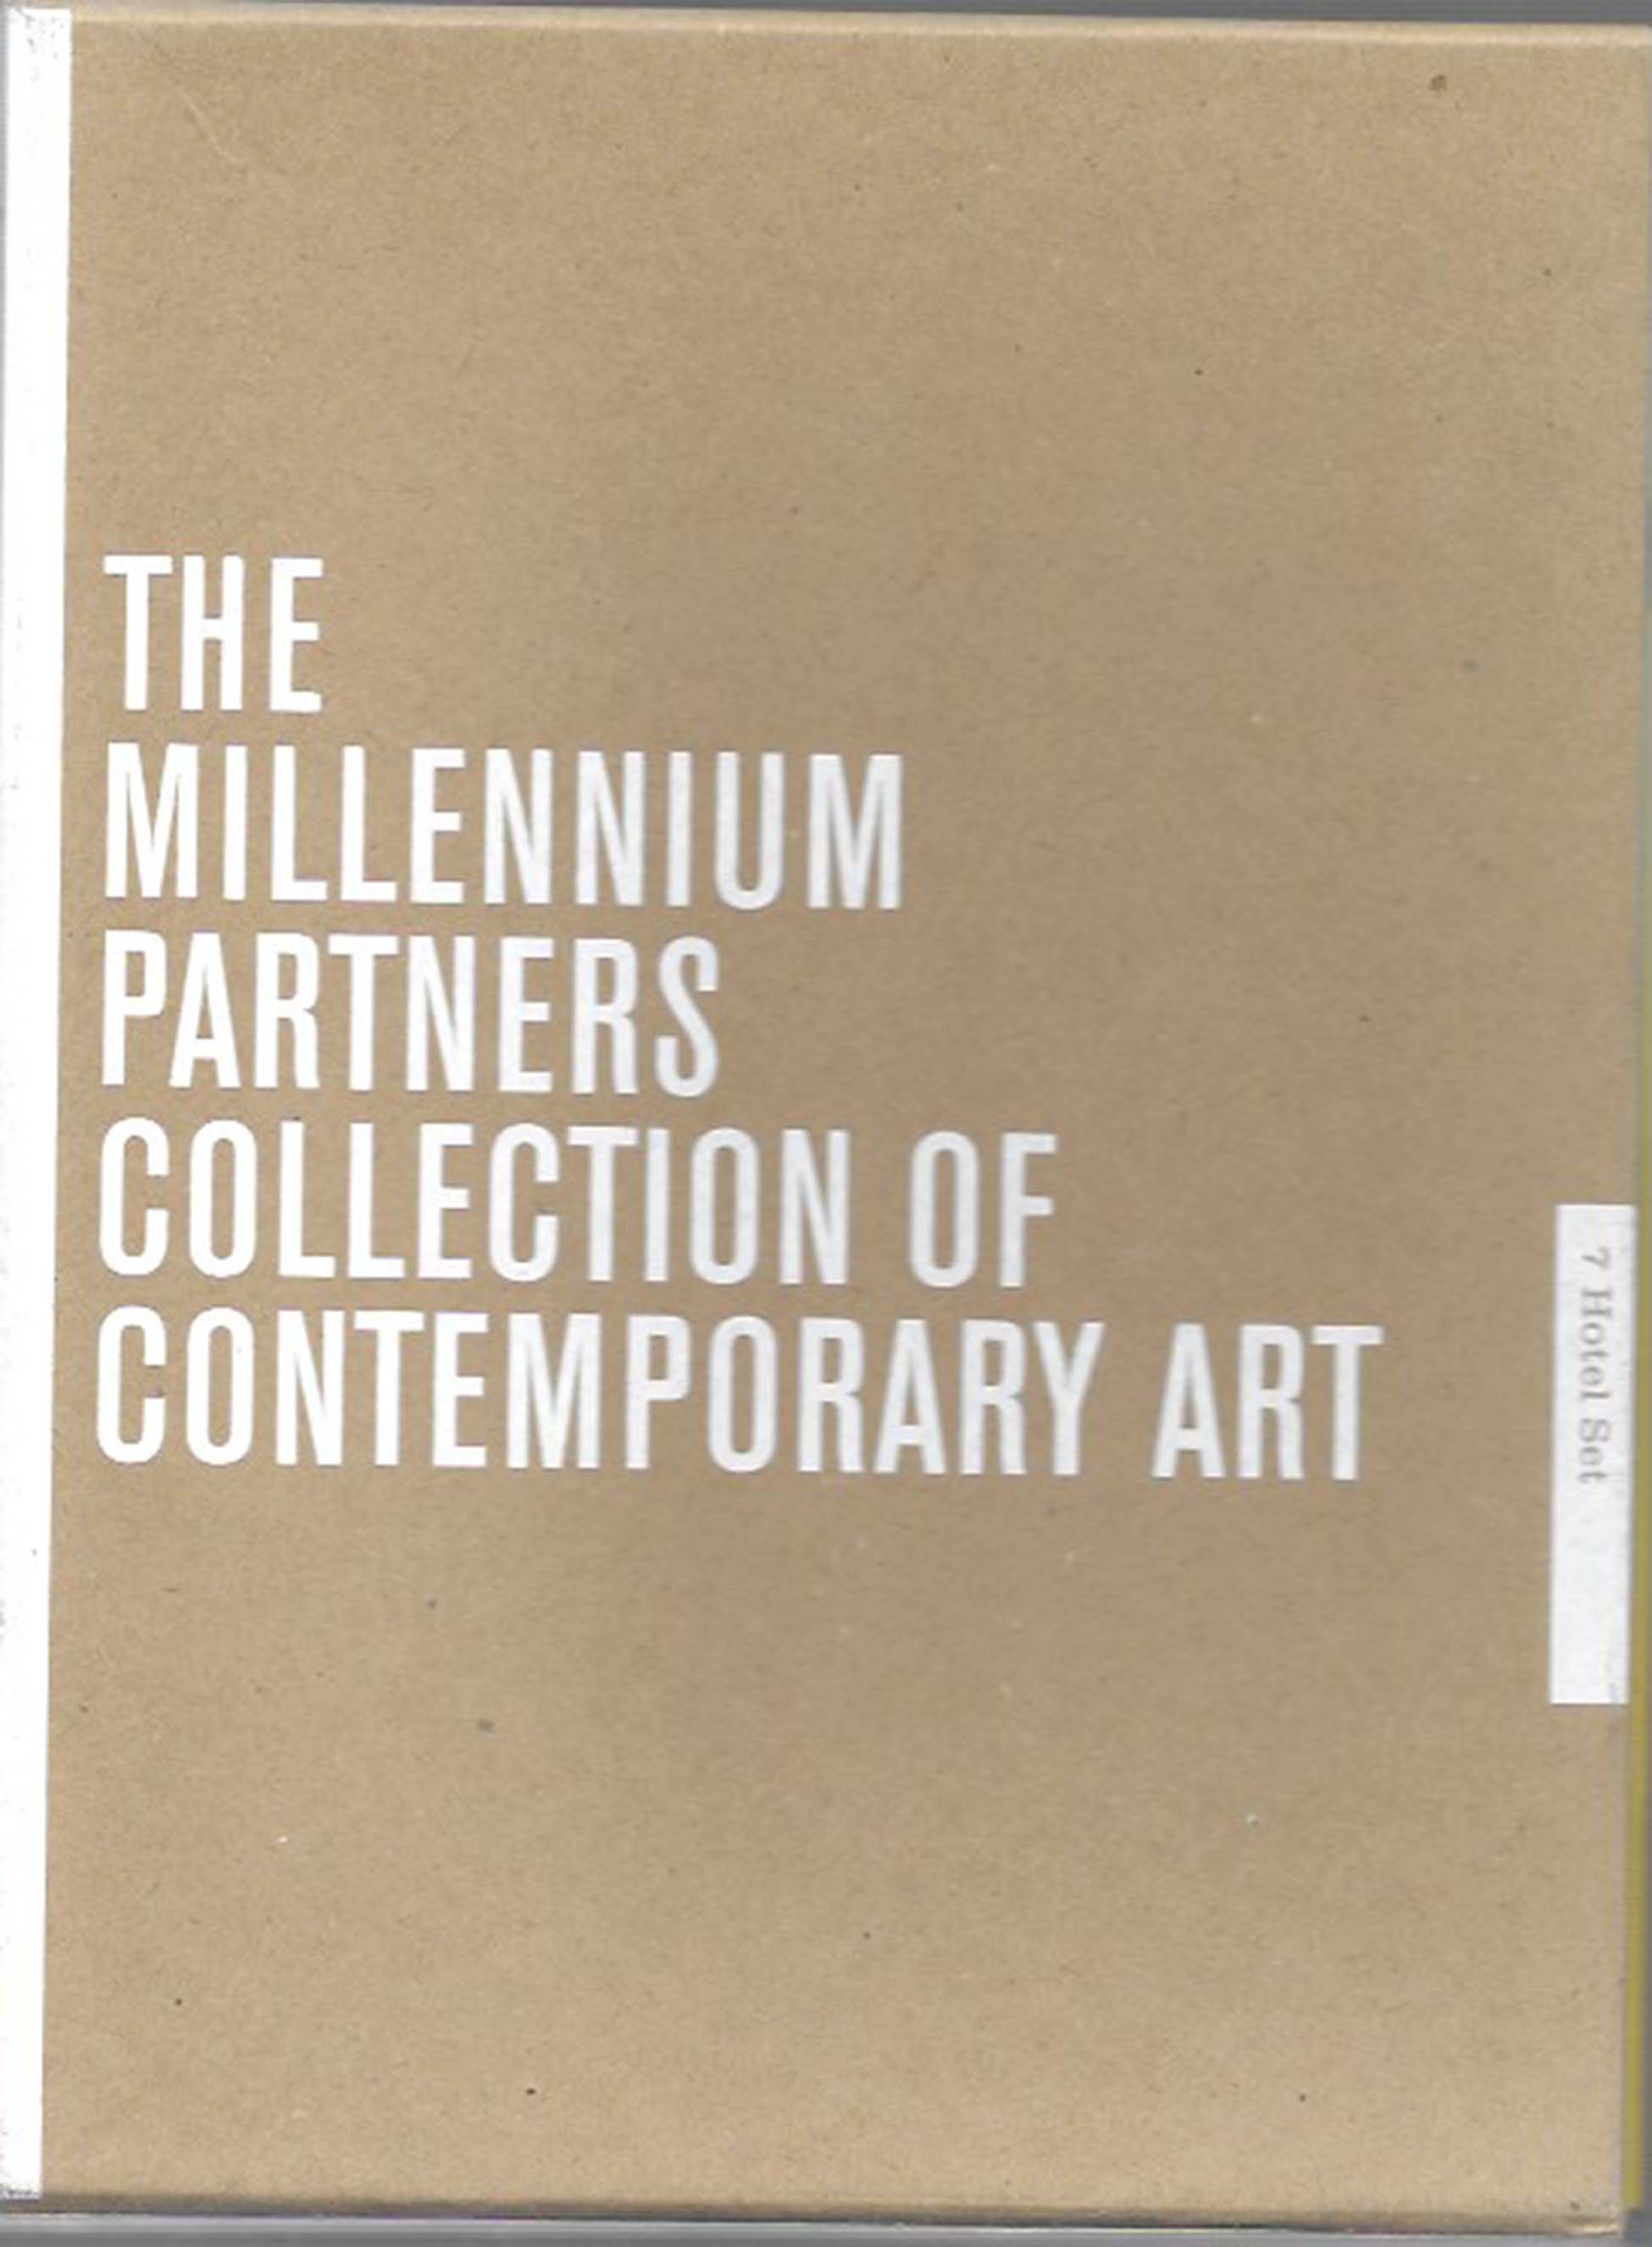 The Millennium Partners Collection of Contemporary Art 